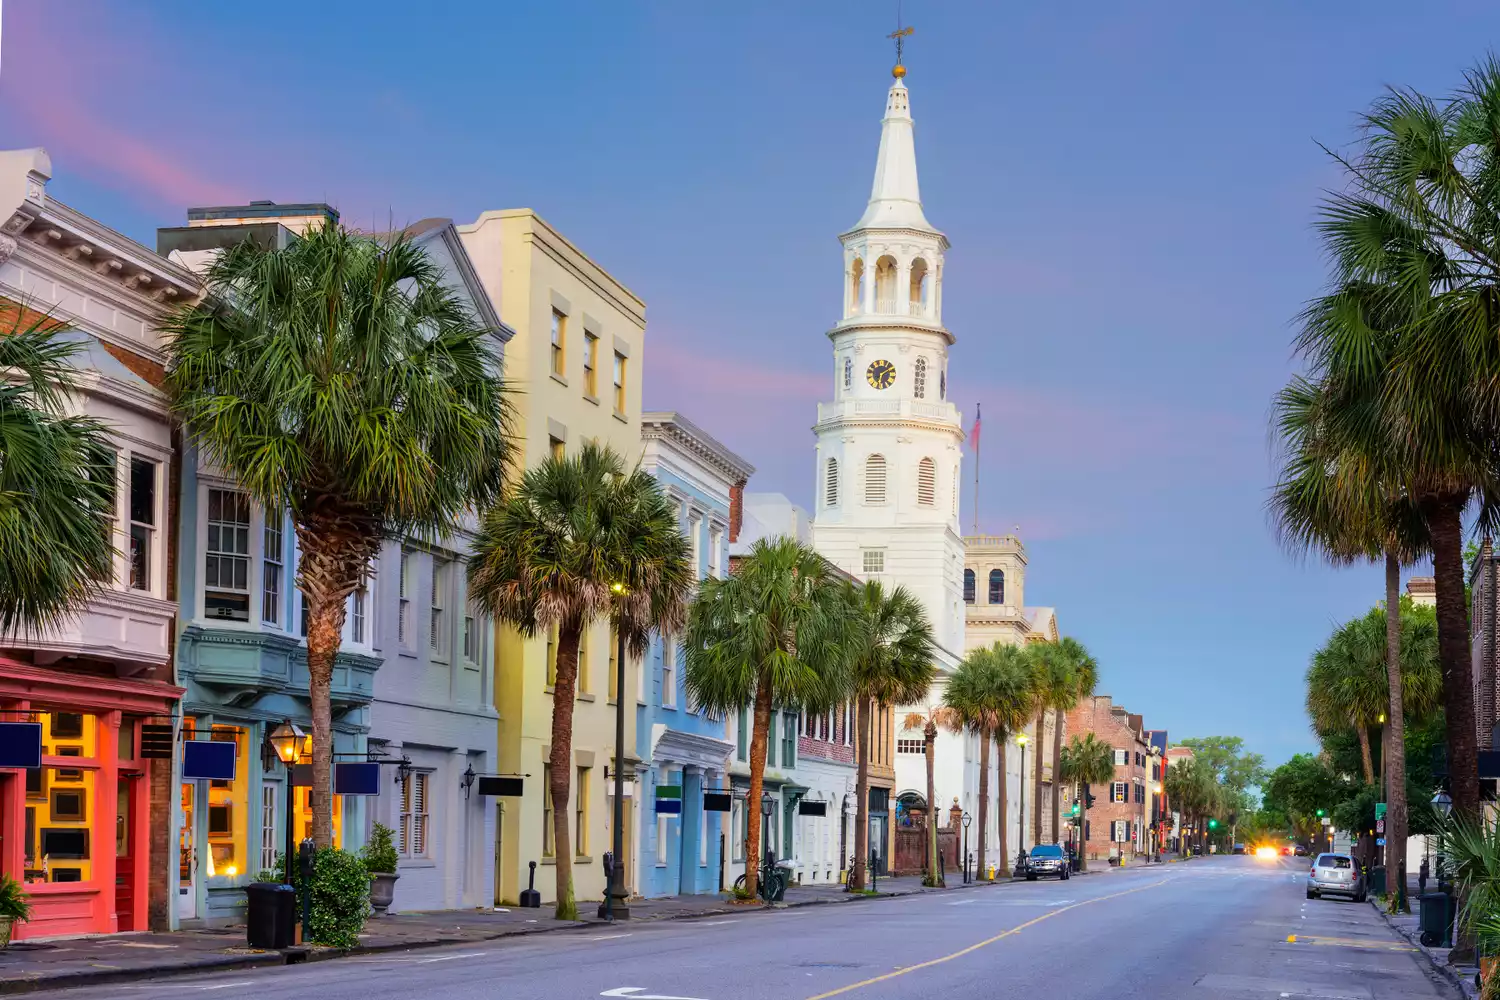 From ghost tours to sunset cruises, there are 24 things to do in Charleston, South Carolina.